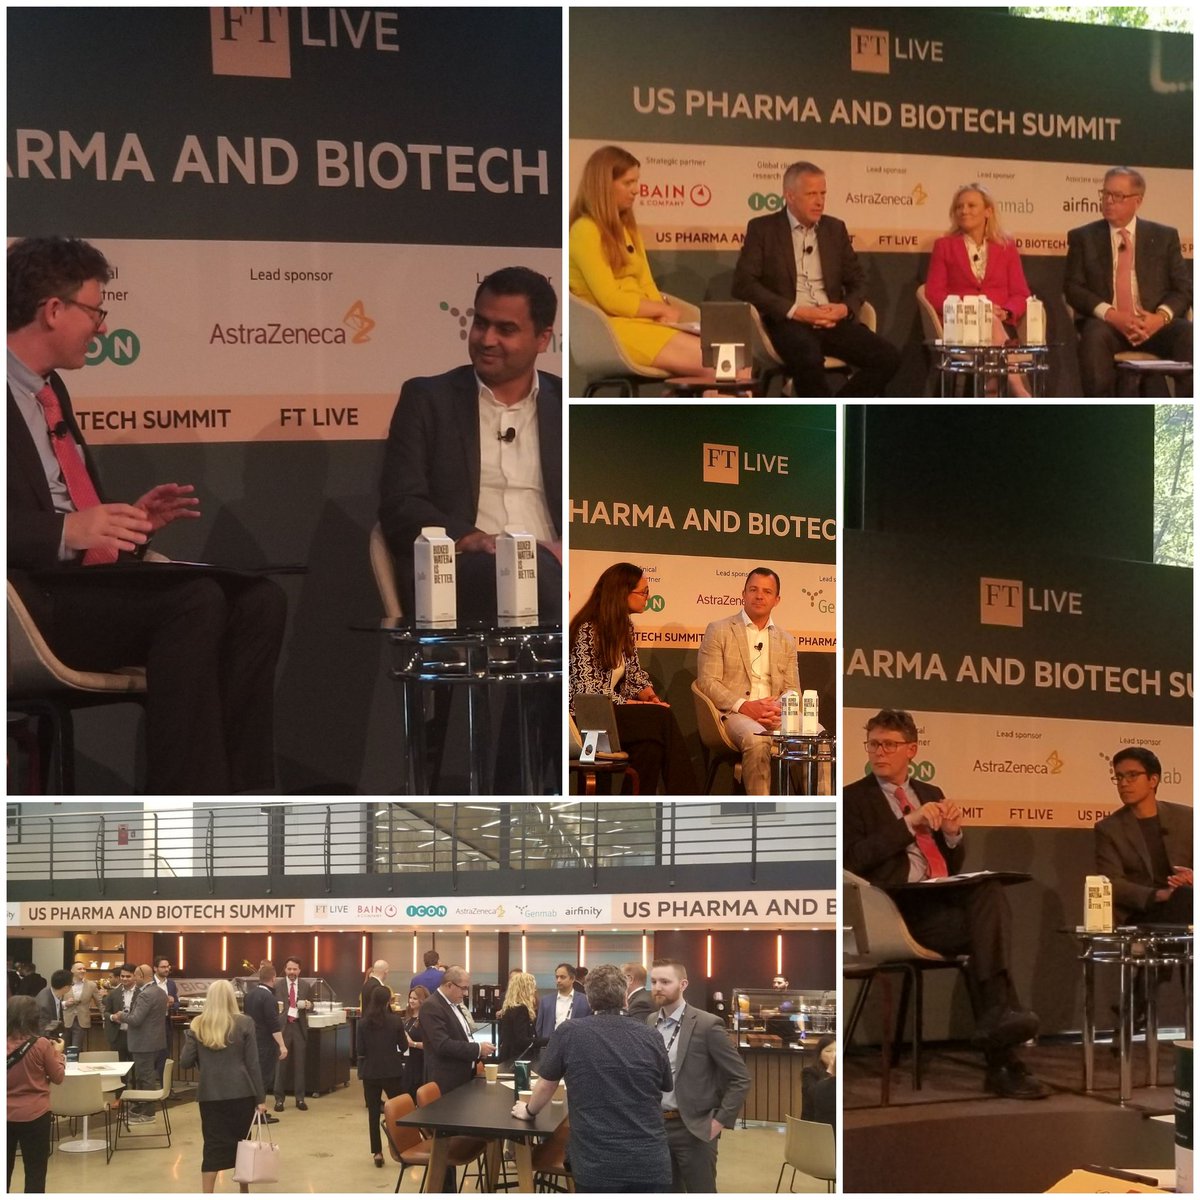 Good to be at #FTPharma at @Convene. A great gathering of #Pharma and #Biotech professionals.